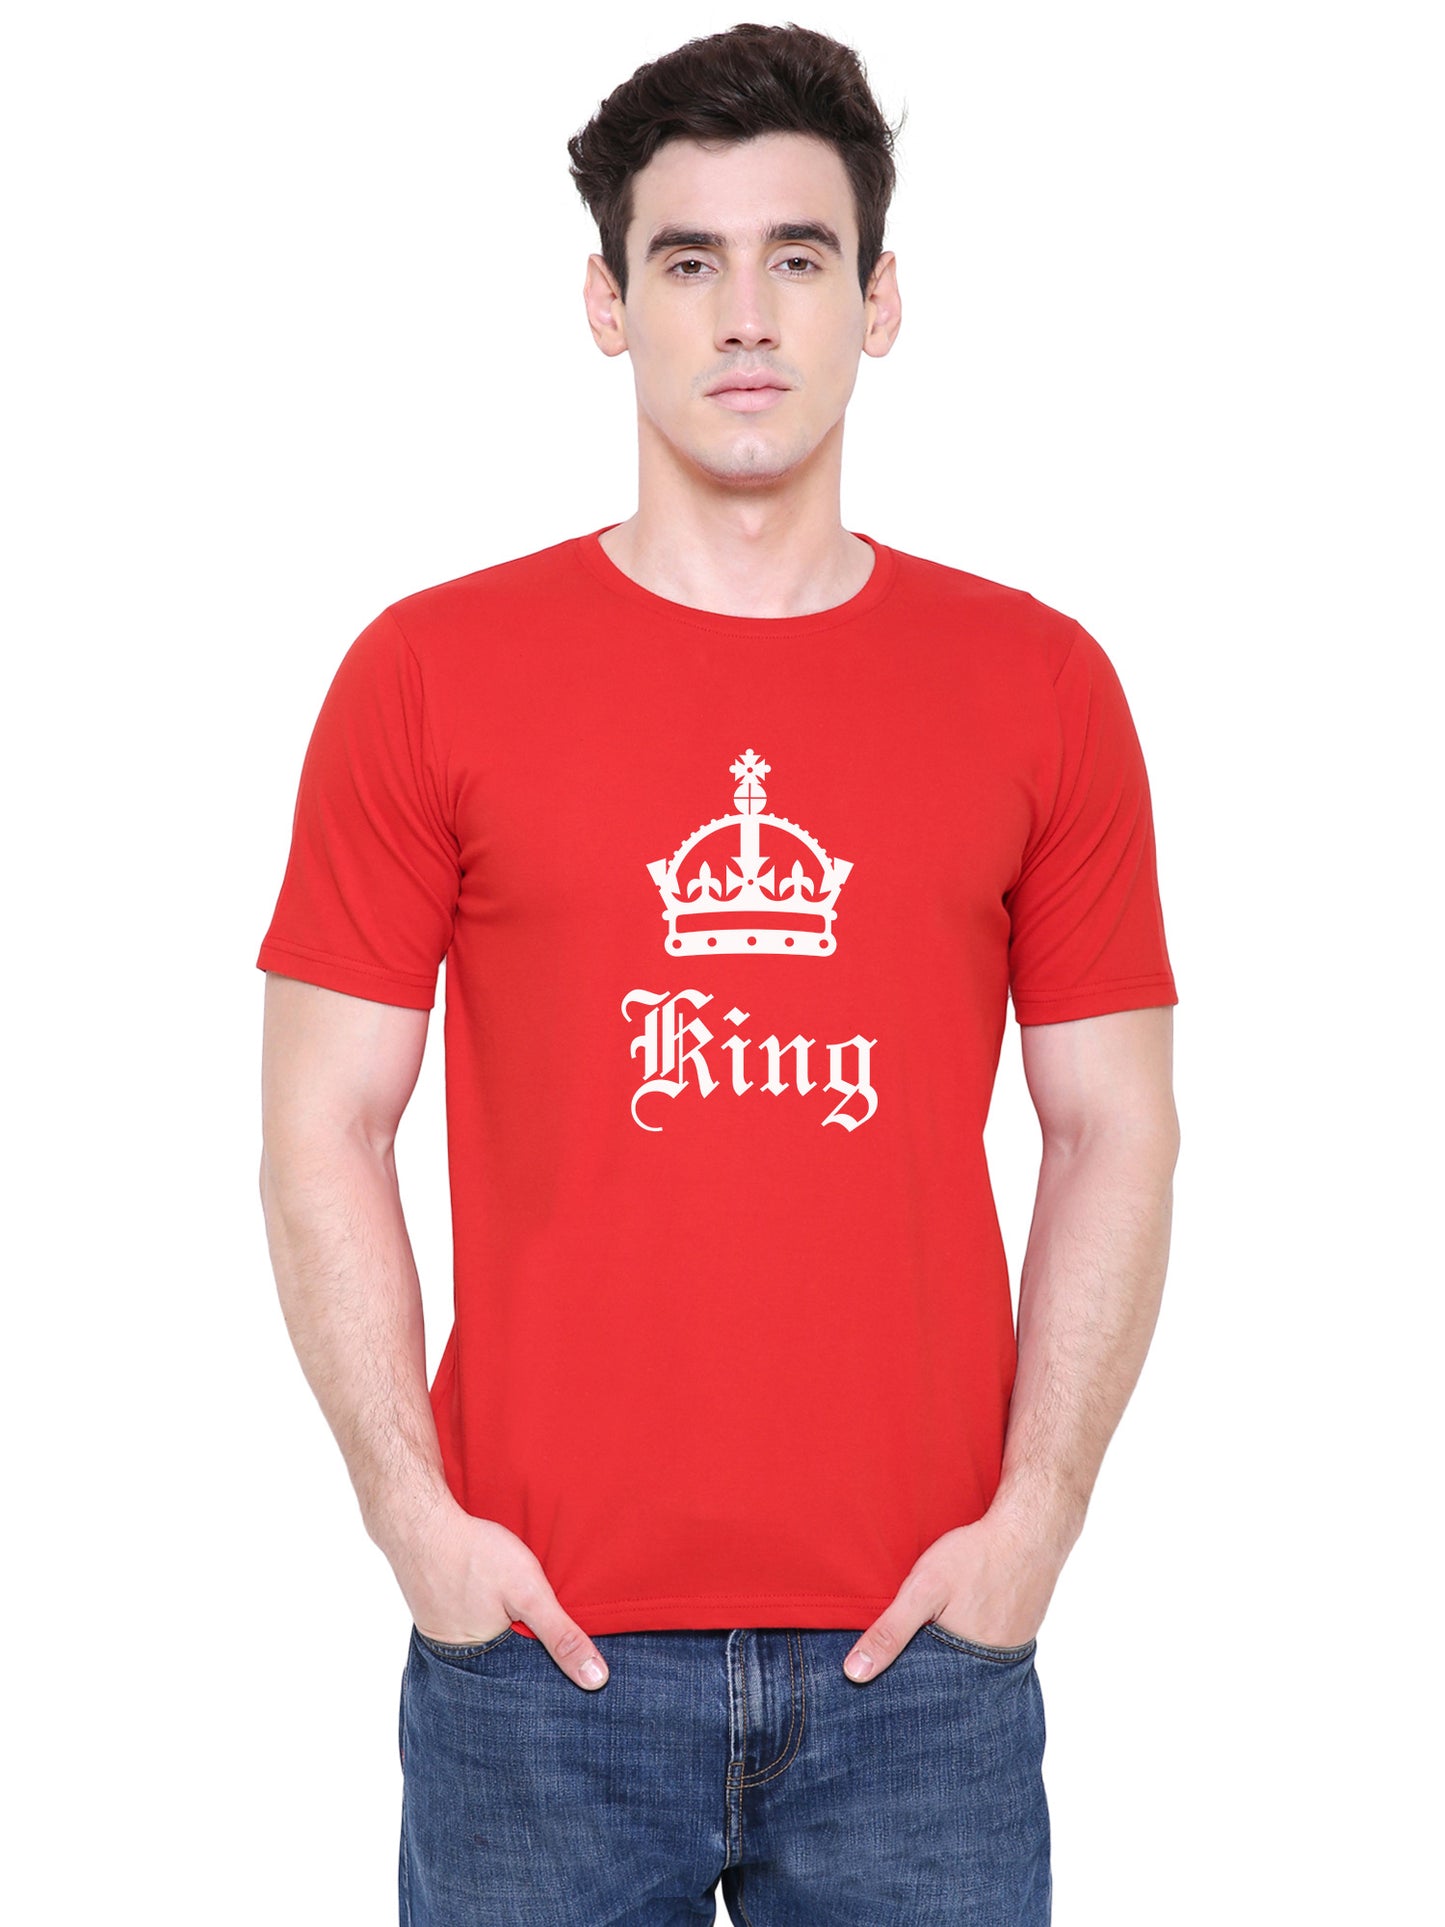 King Queen matching Couple T shirts- Red